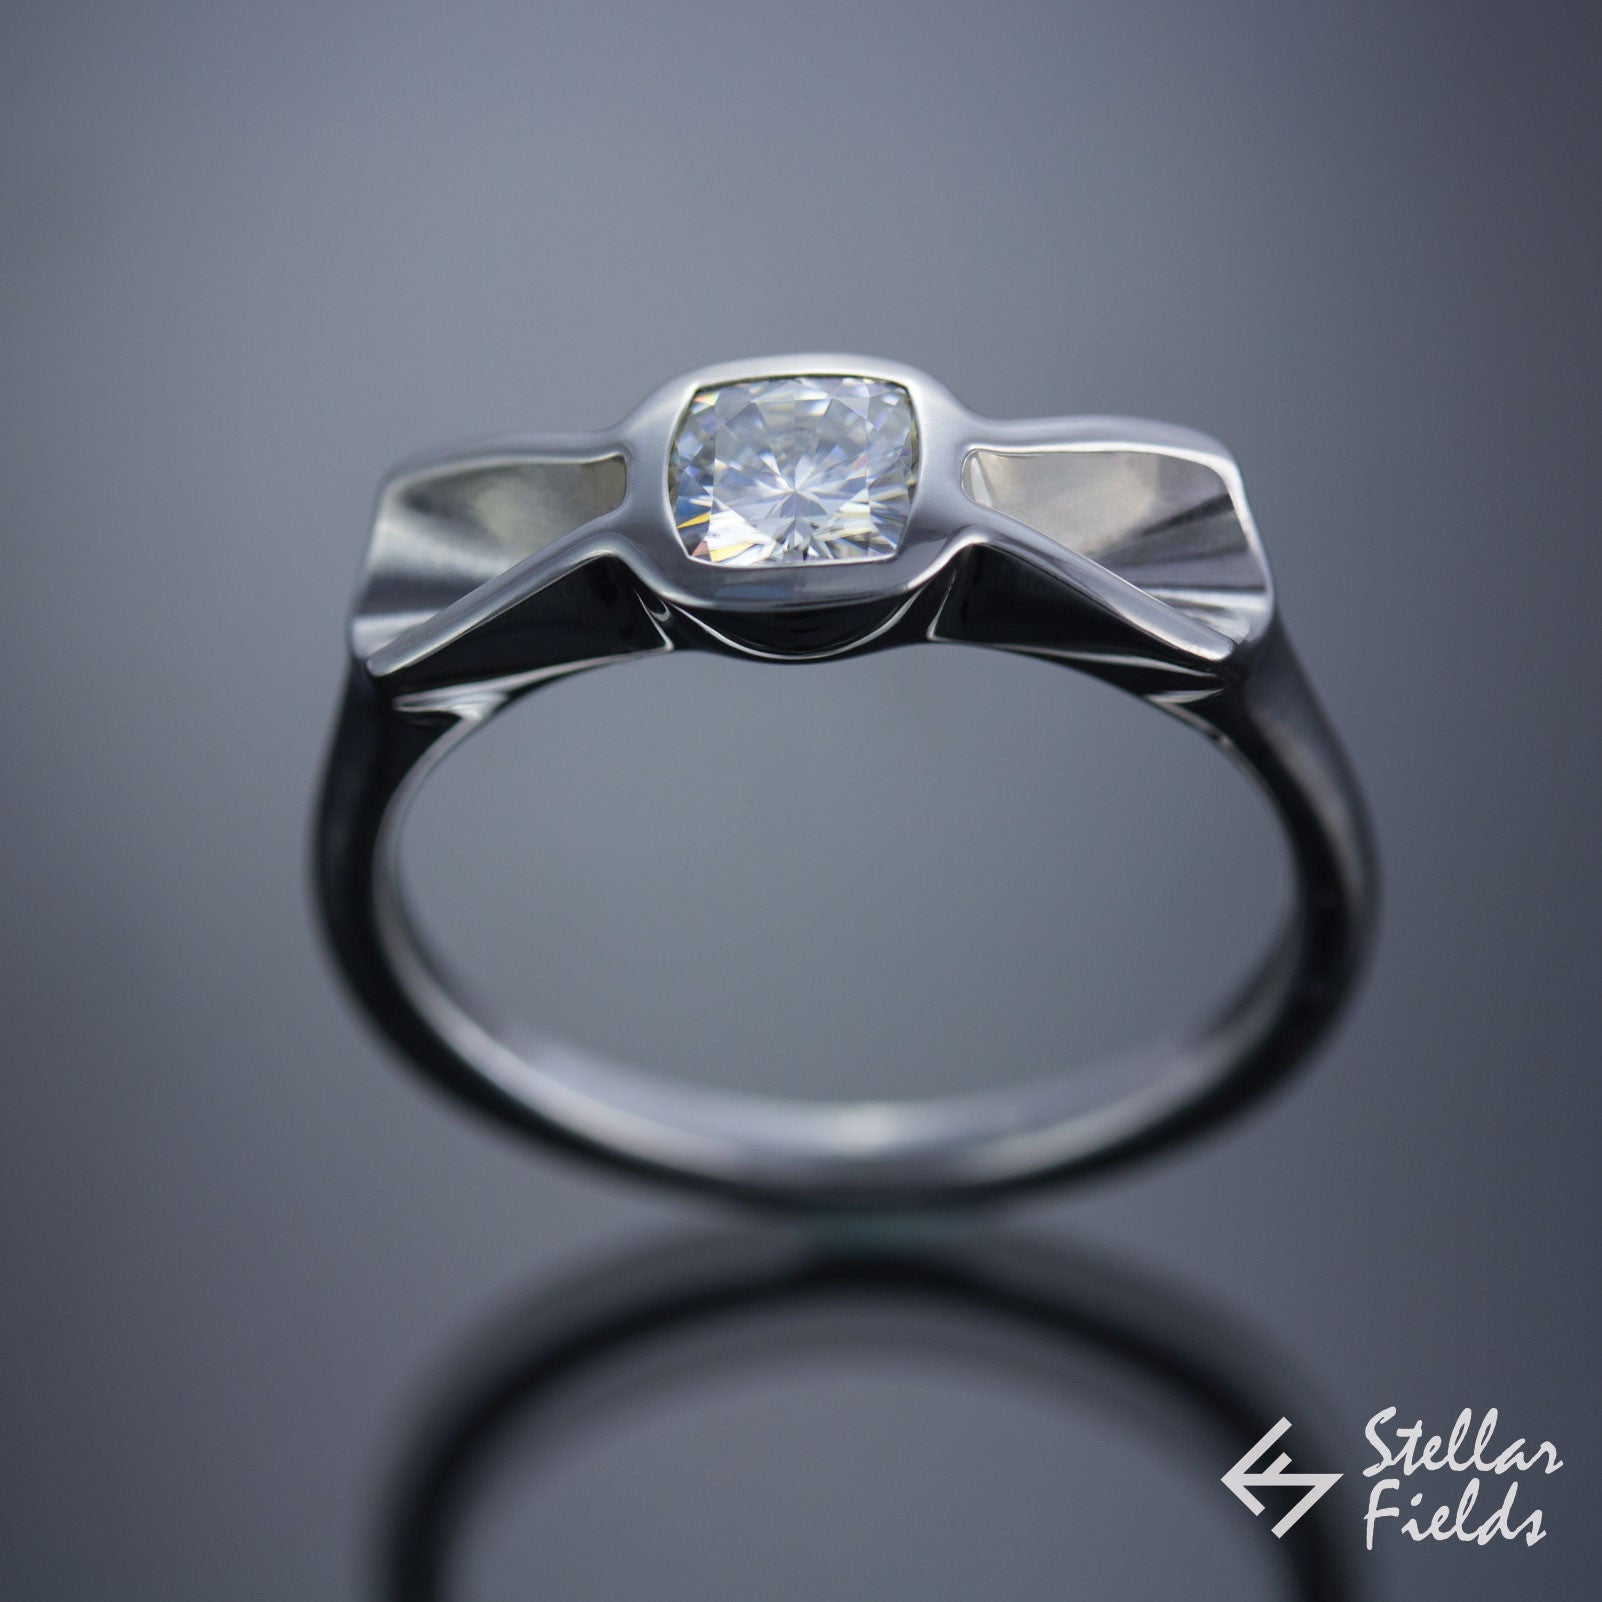 unique bow tie ring 14k white gold with cushion moissanite stellar fields jewelry